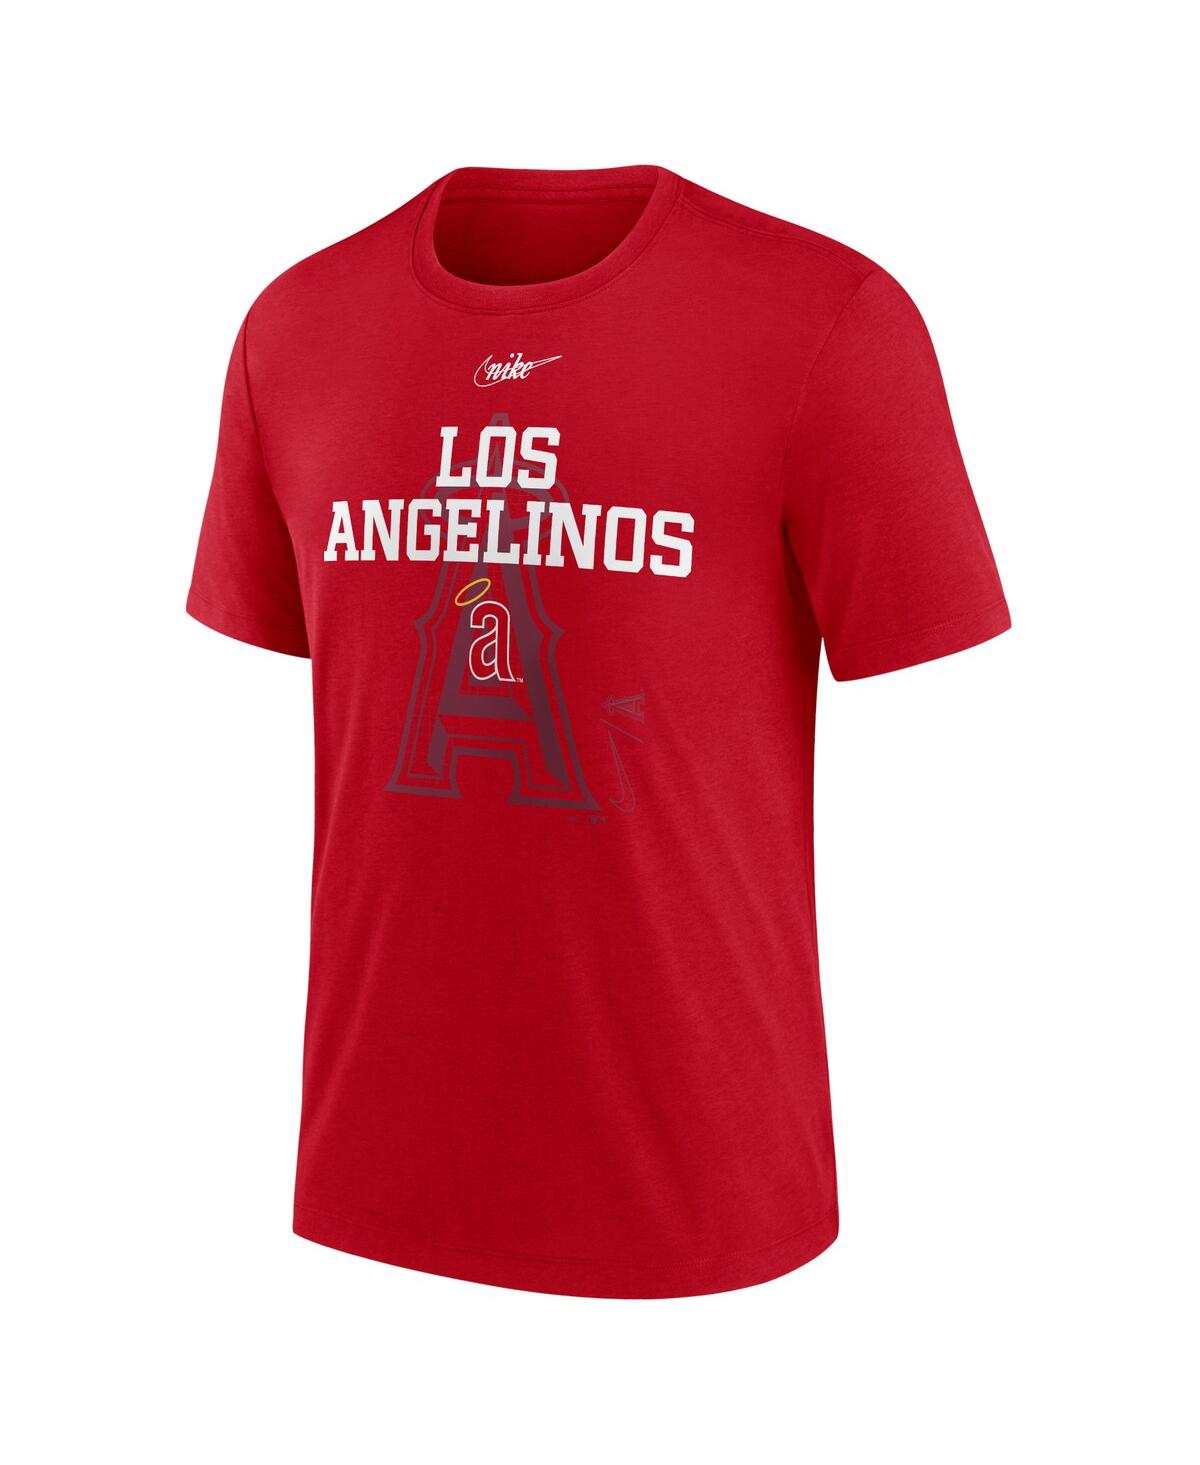 Shop Nike Men's  Red California Angels Cooperstownâ Collection Rewind Retro Tri-blend T-shirt